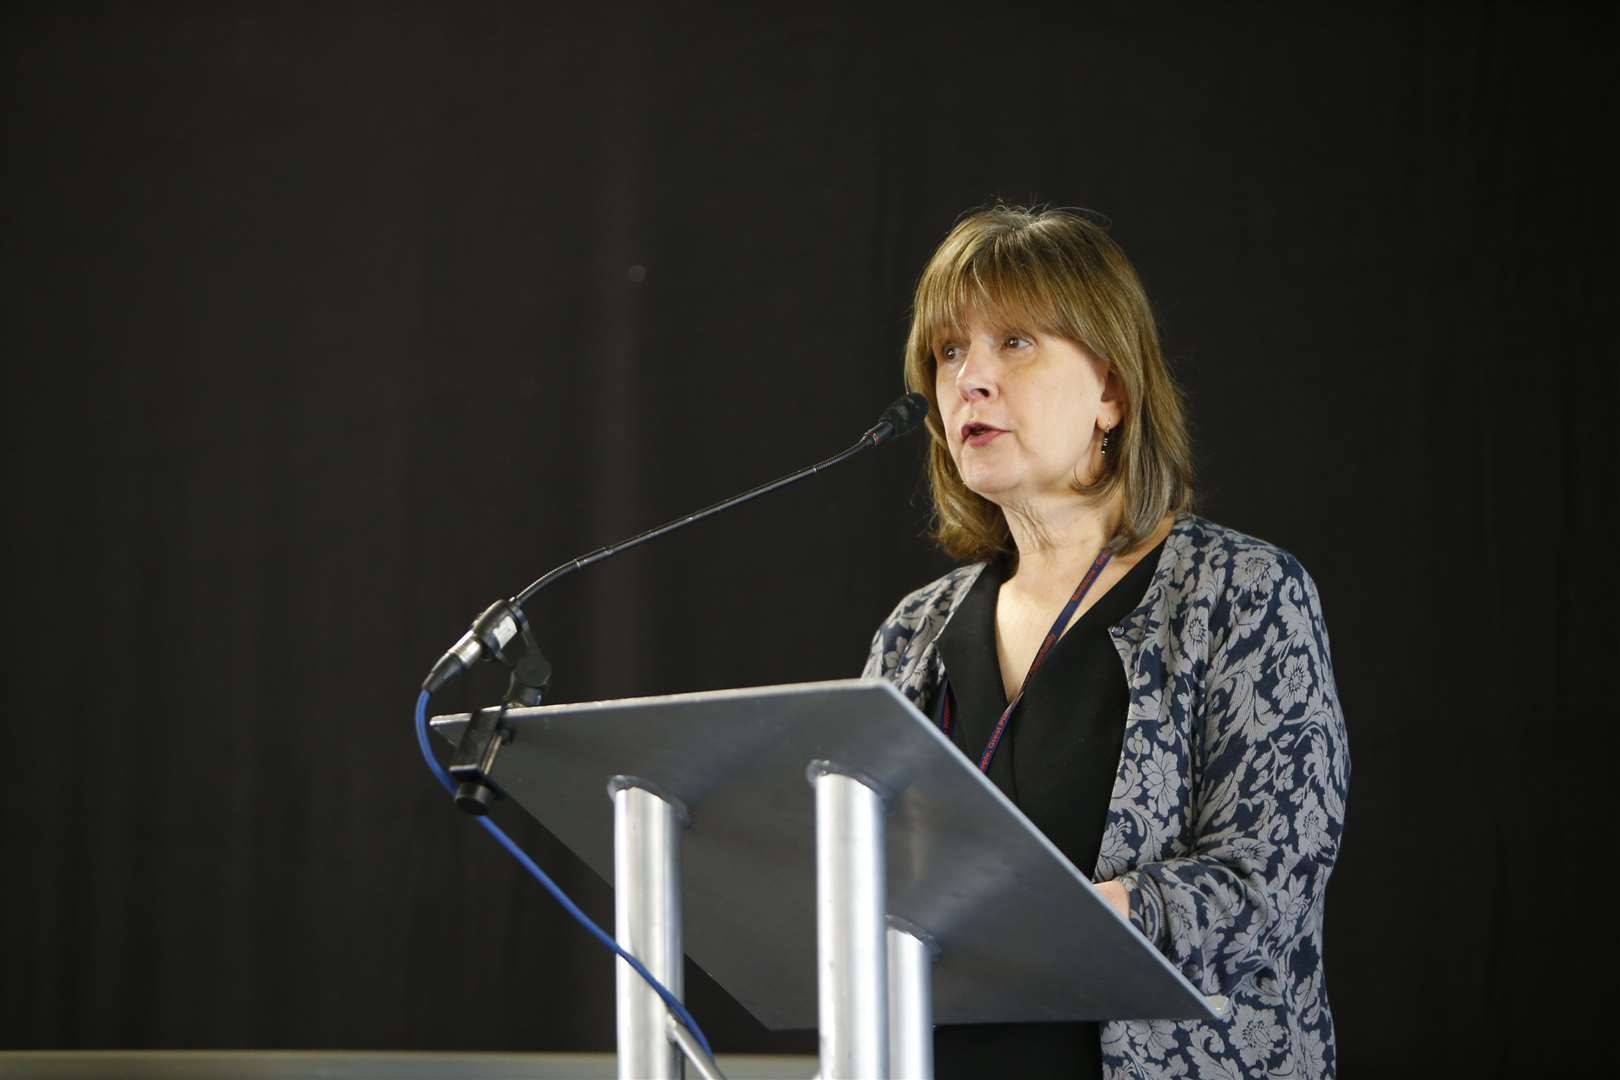 The council's chief executive officer Alison Broom